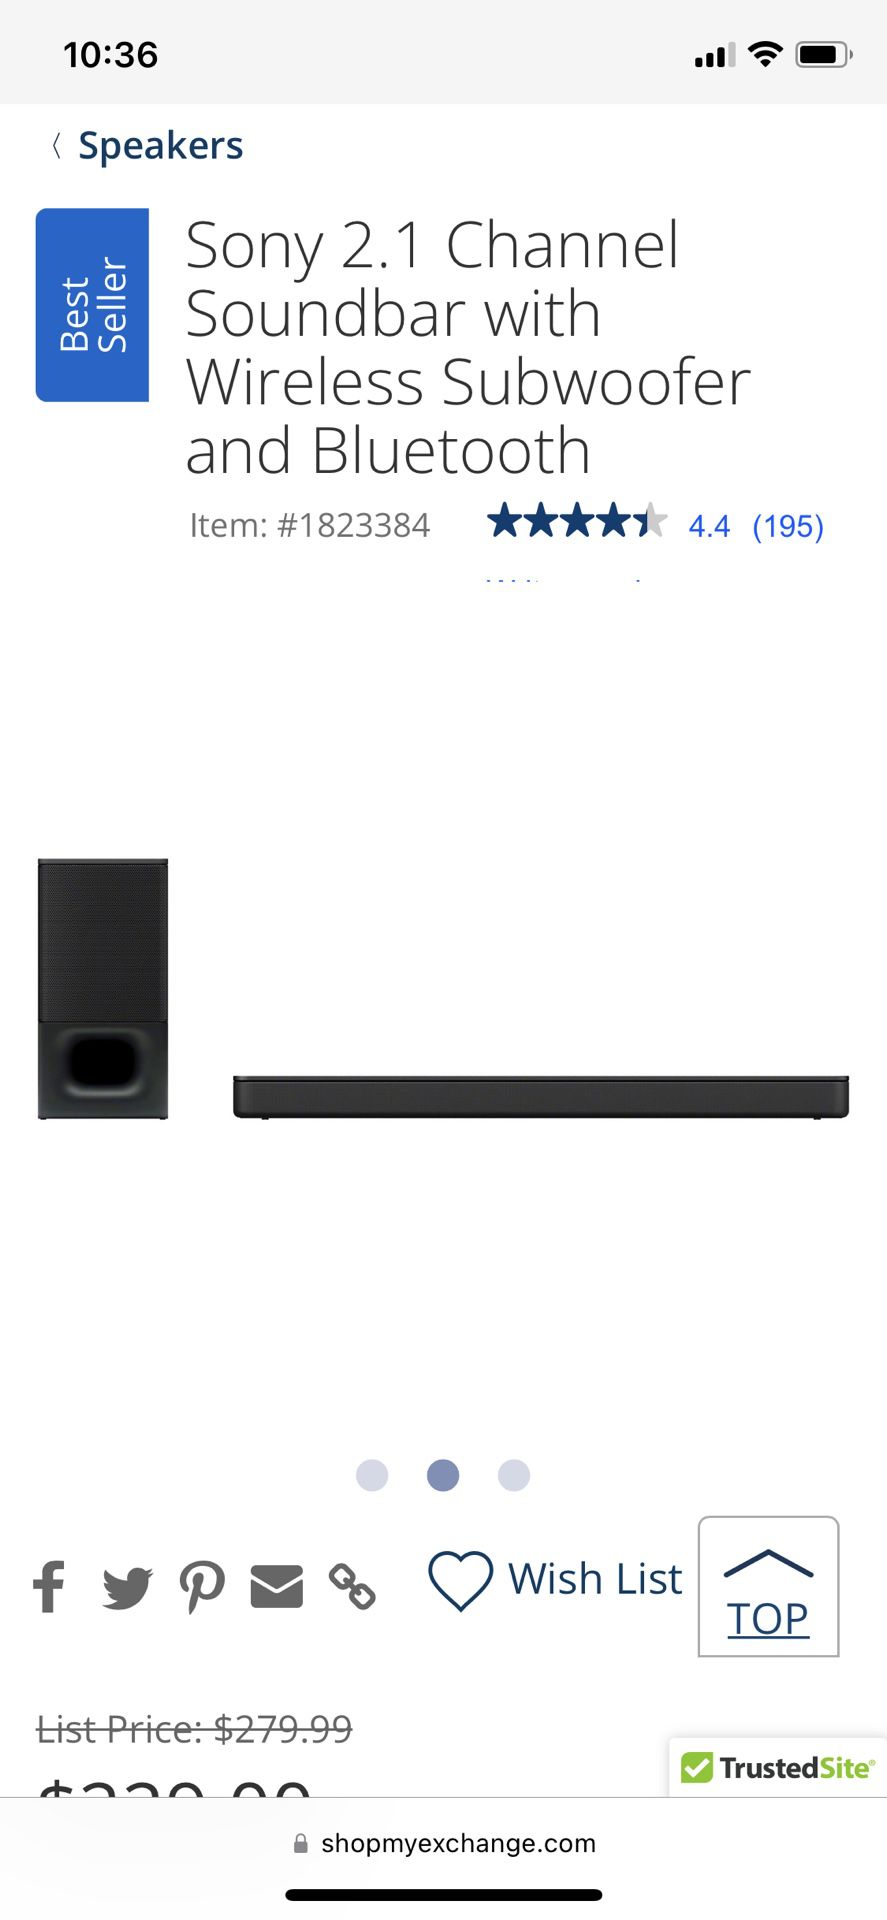 Sony 2.1 Channel Soundbar with Wireless Subwoofer and Bluetooth 65.00